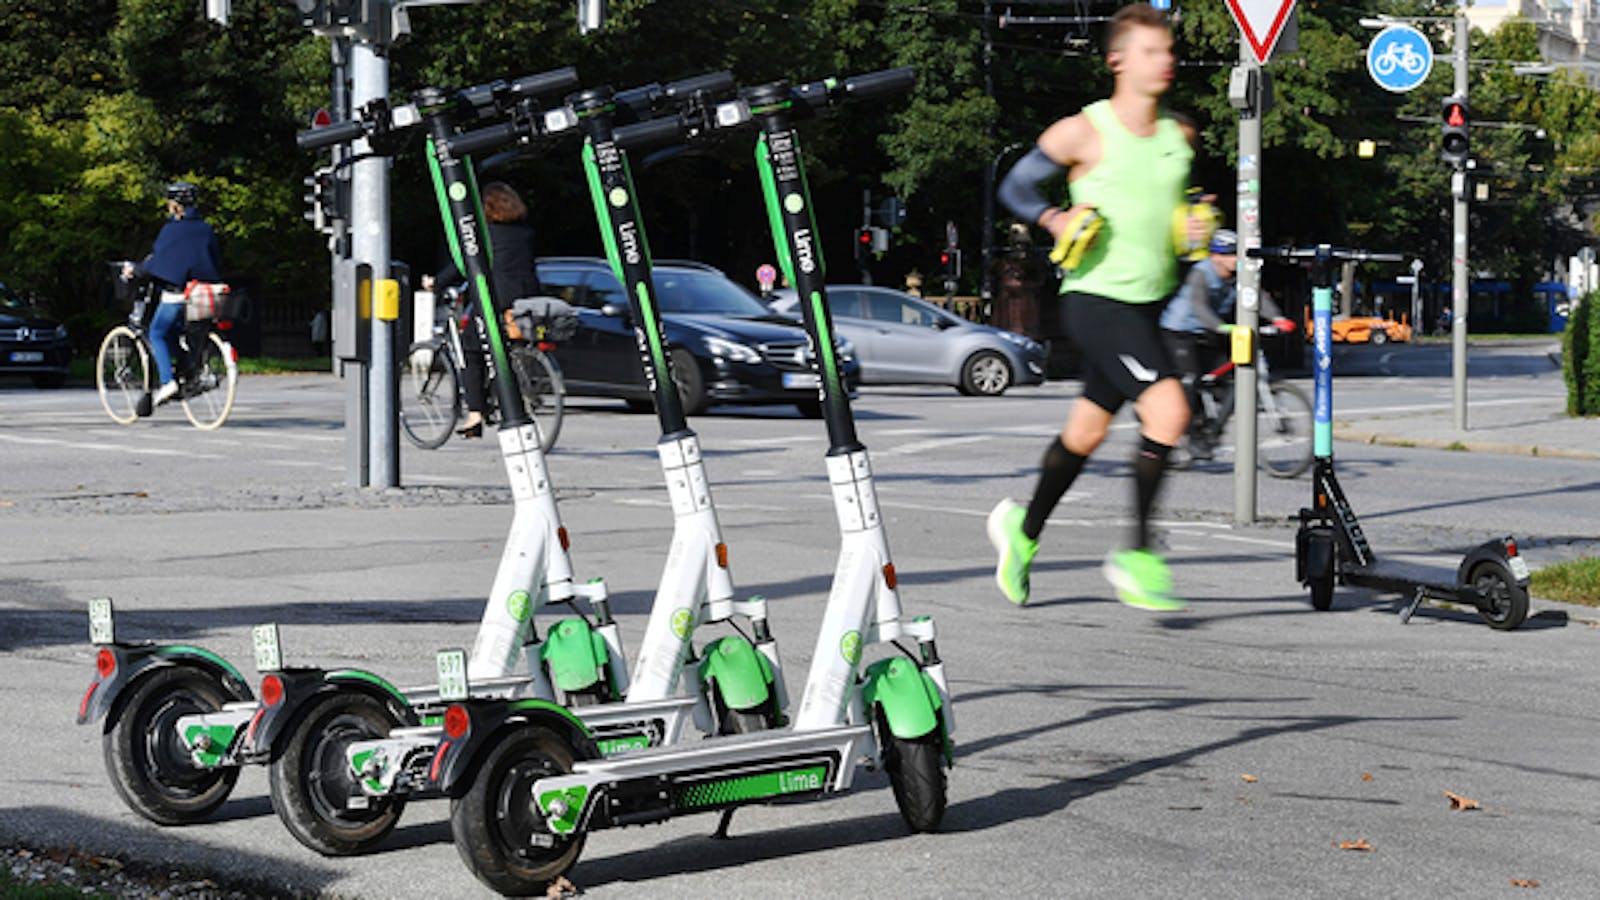 Lime scooters in Munich, Germany. Photo: AP